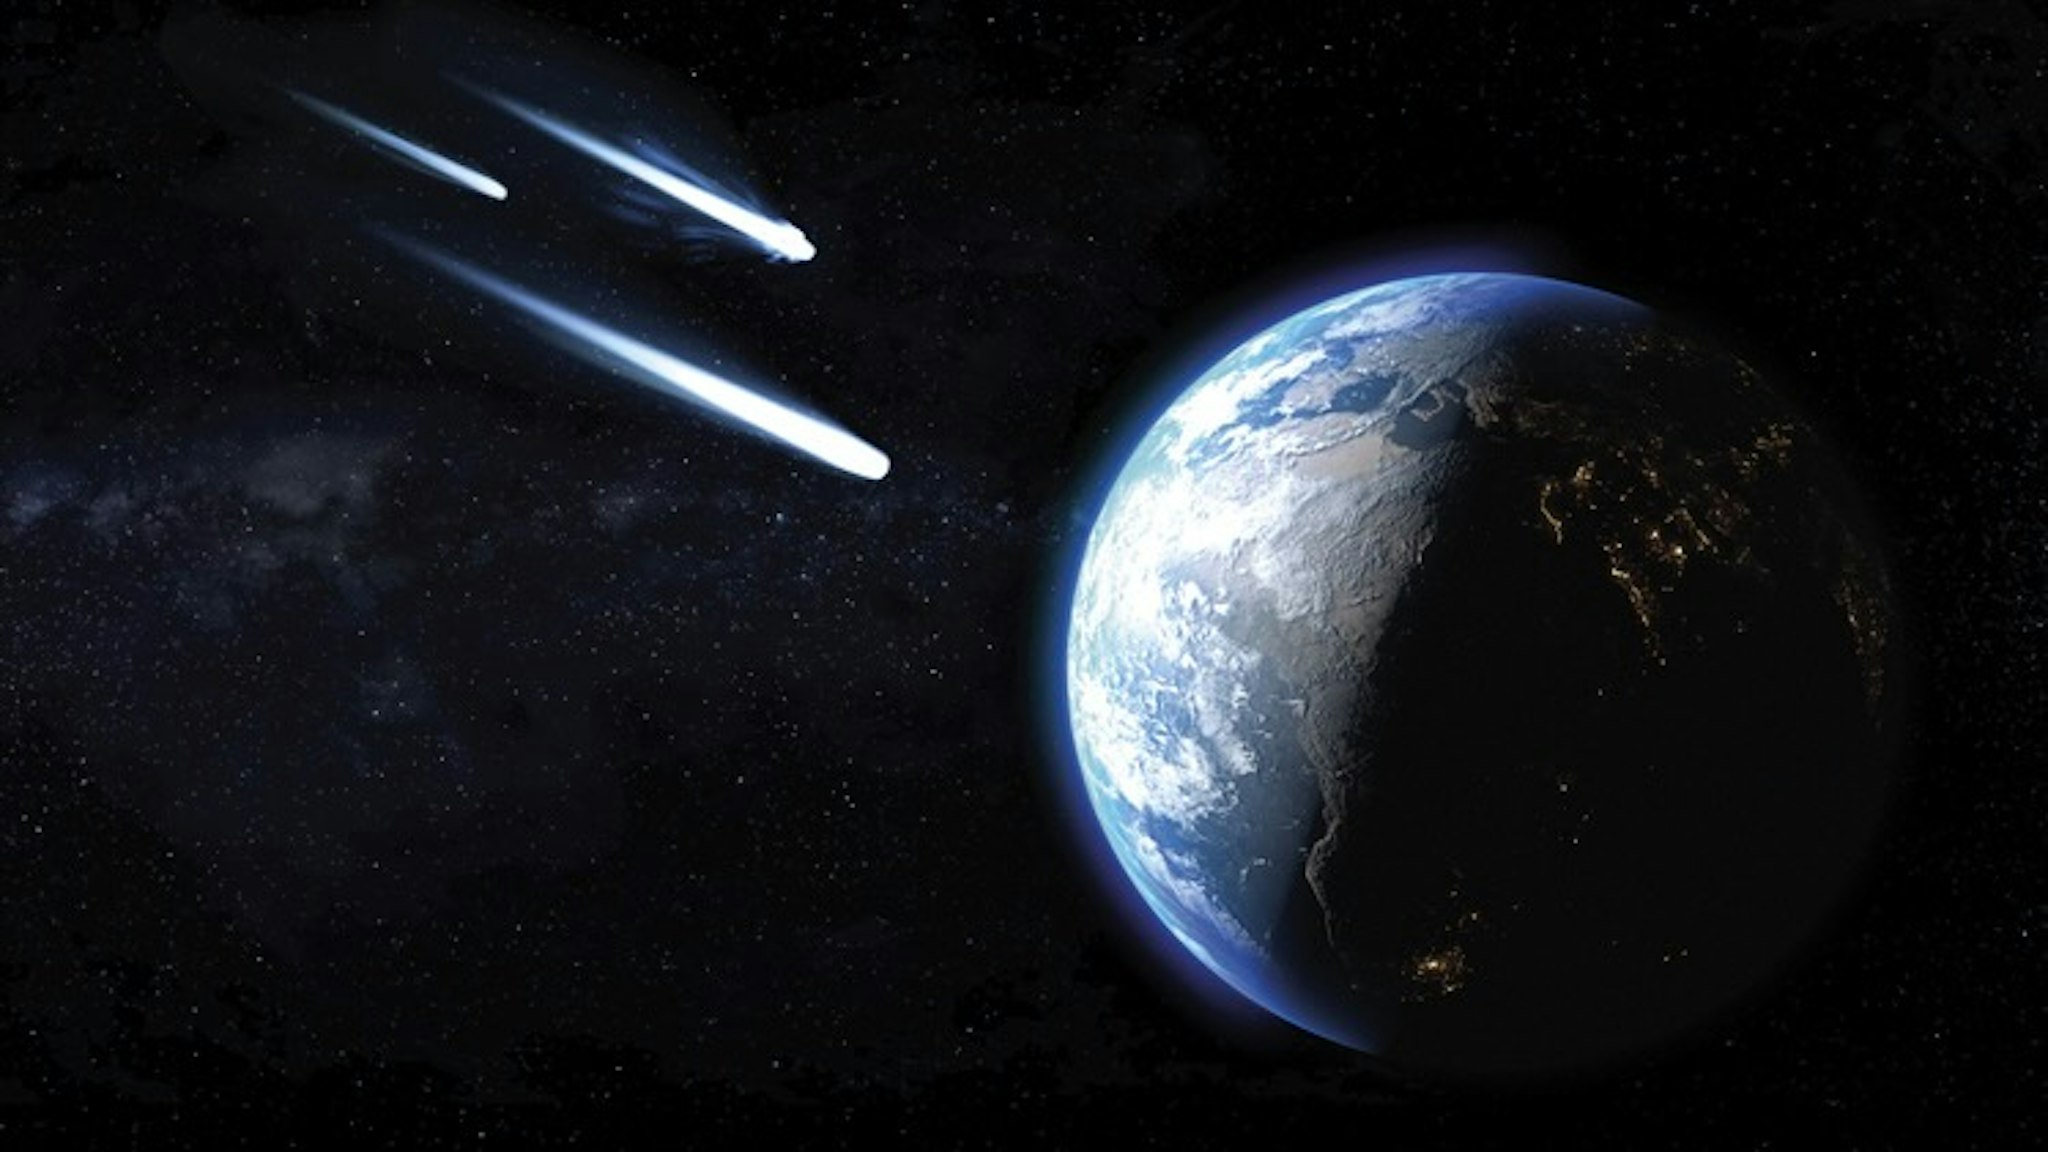 Comets passing by earth, illustration - stock illustration Three icy comets passing by planet Earth, illustration.